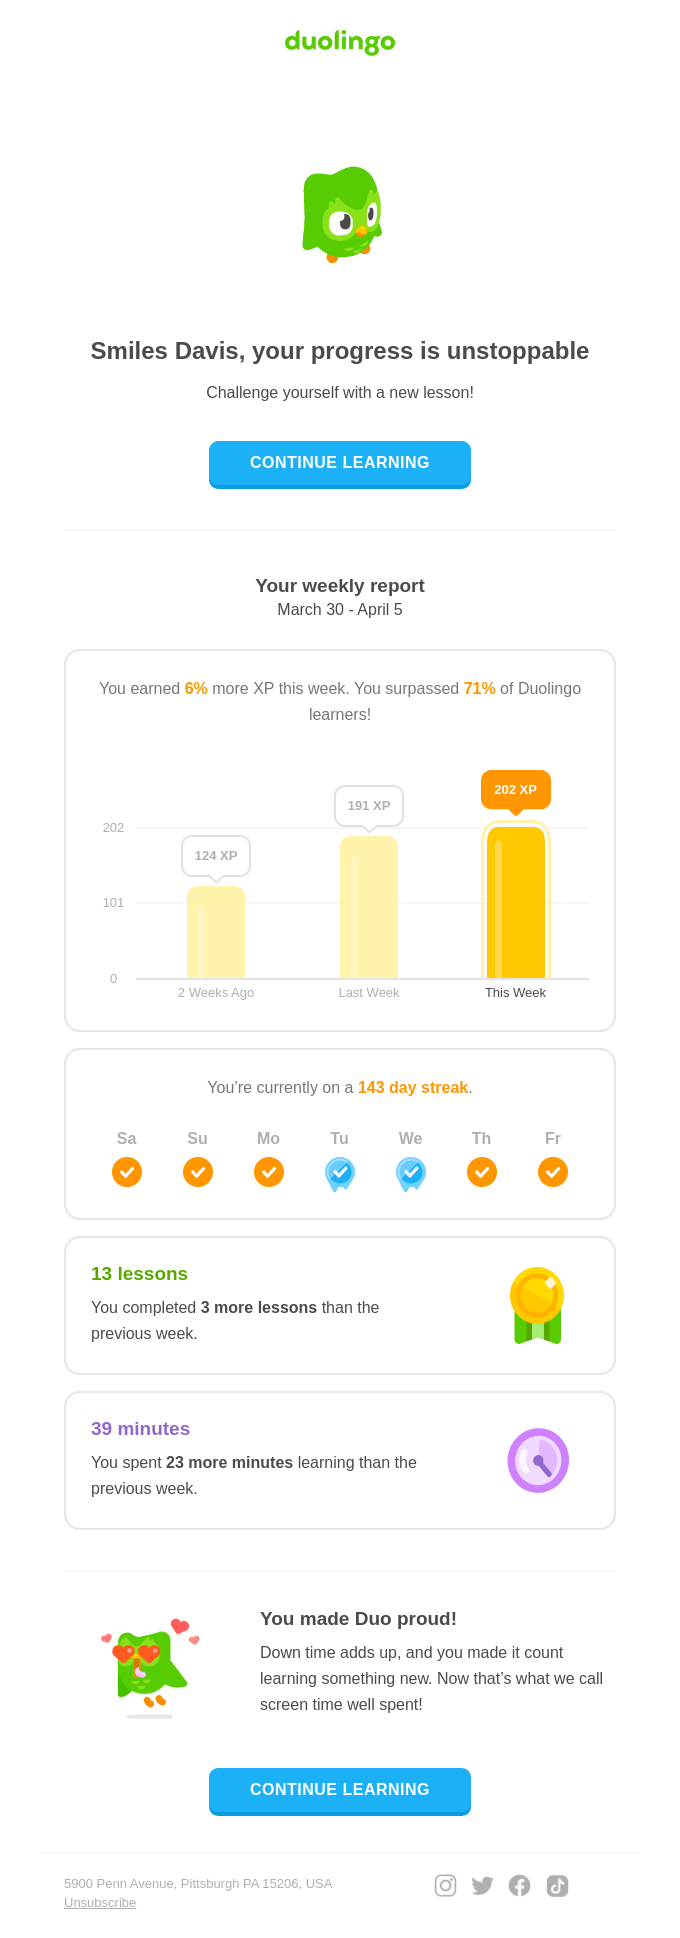 Personalized app user retention email - Duolingo example